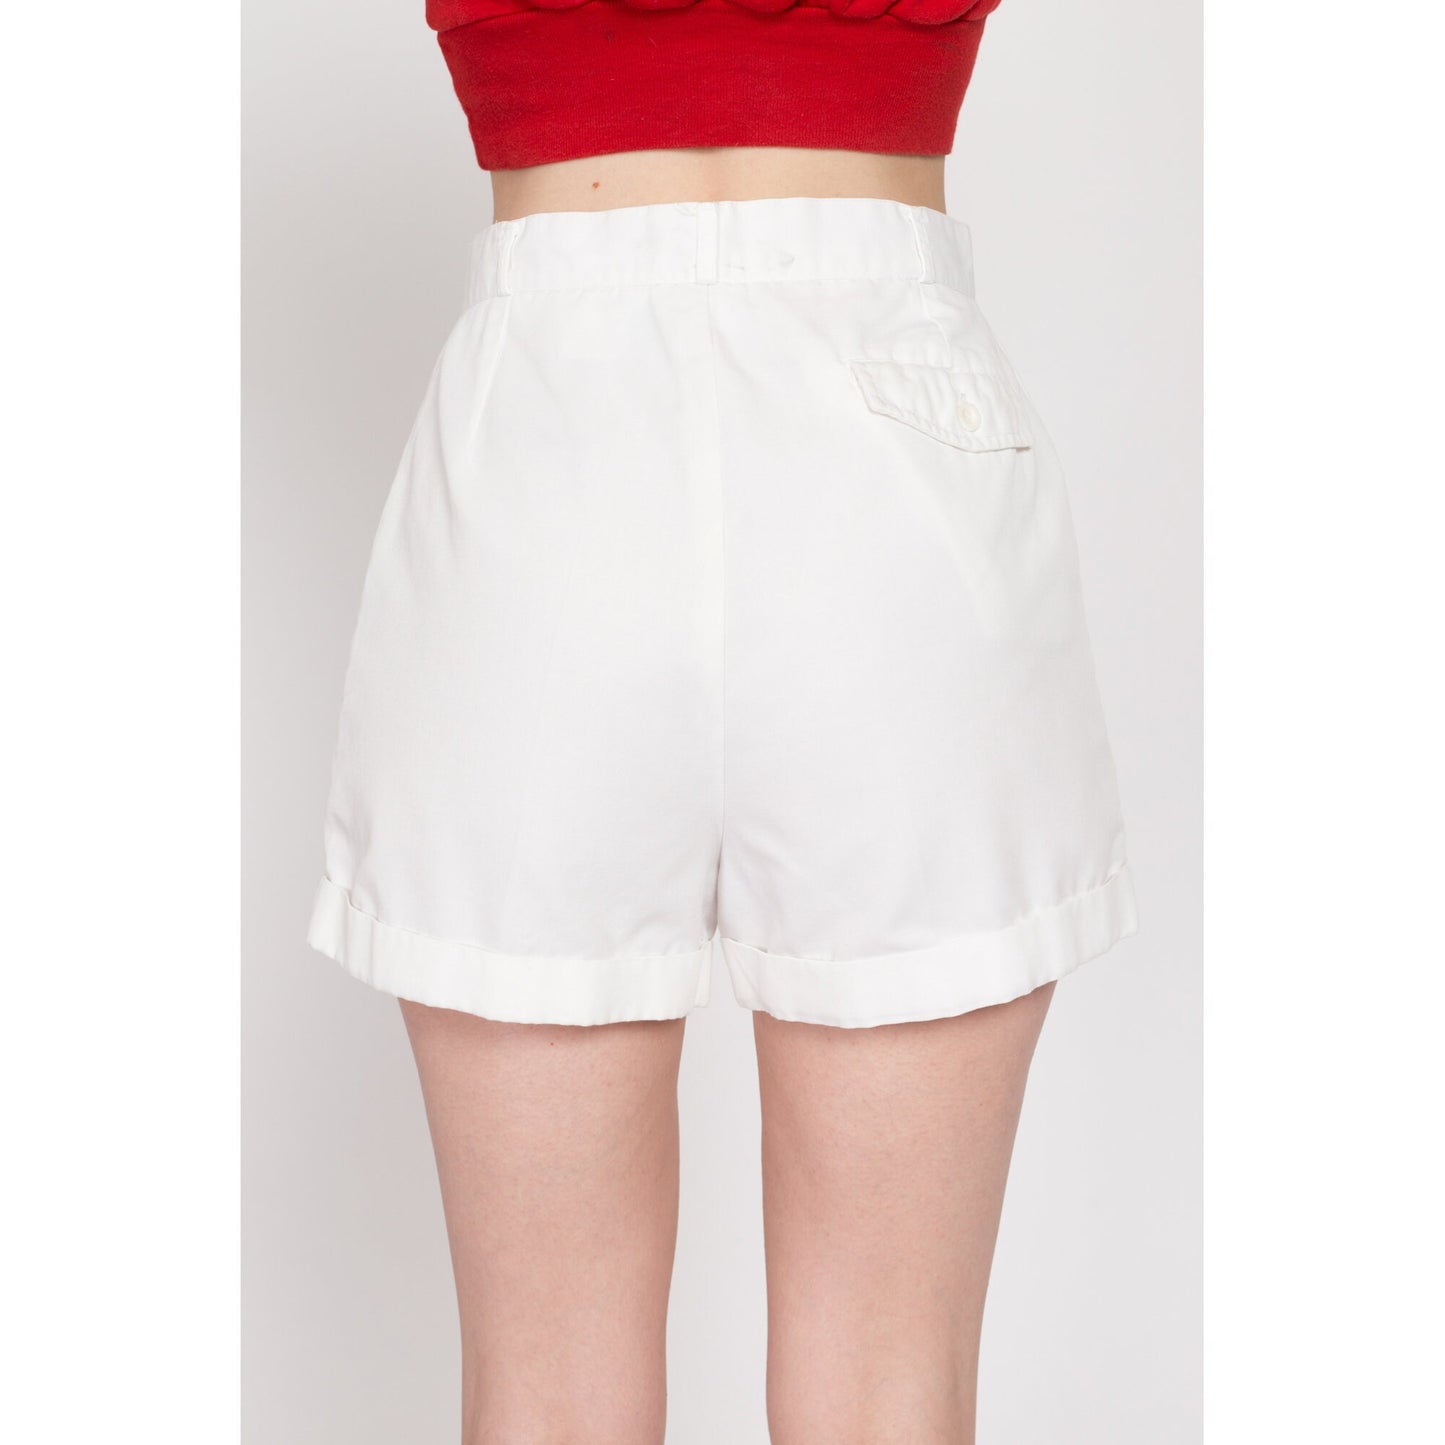 Small 80s White High Waisted Shorts 26.5" | Vintage Cuffed Cotton Blend Summer Shorts